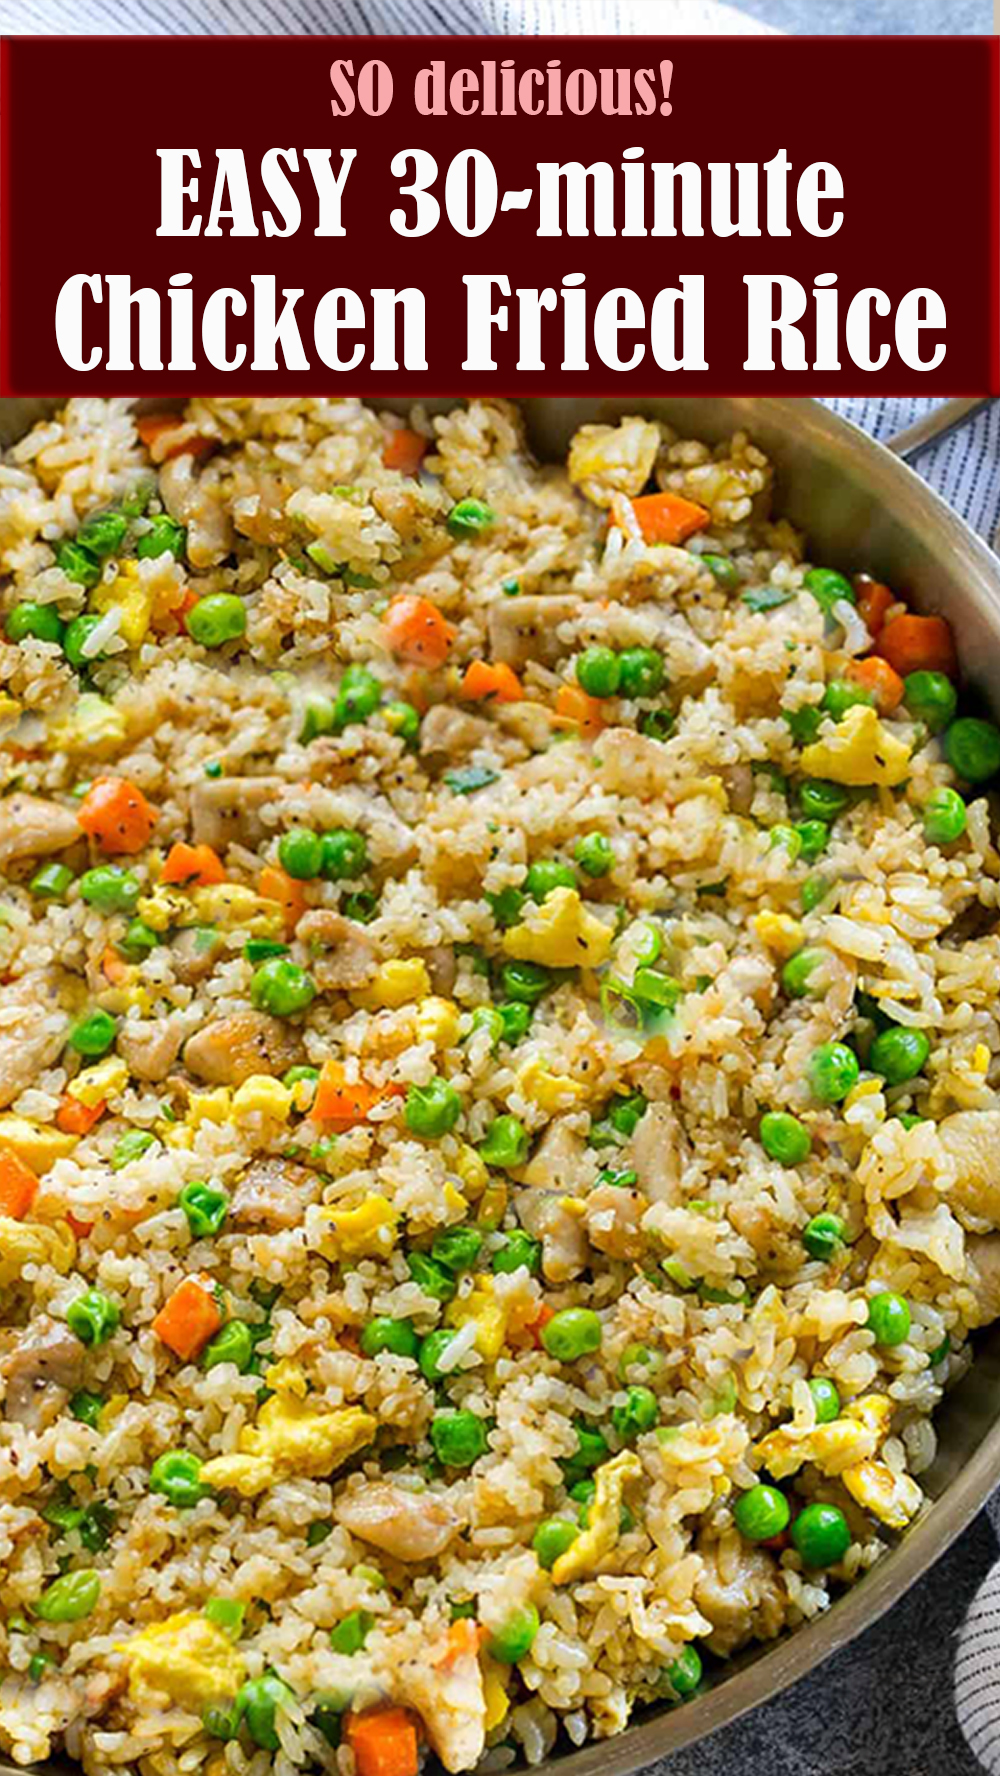 EASY 30-minute Chicken Fried Rice